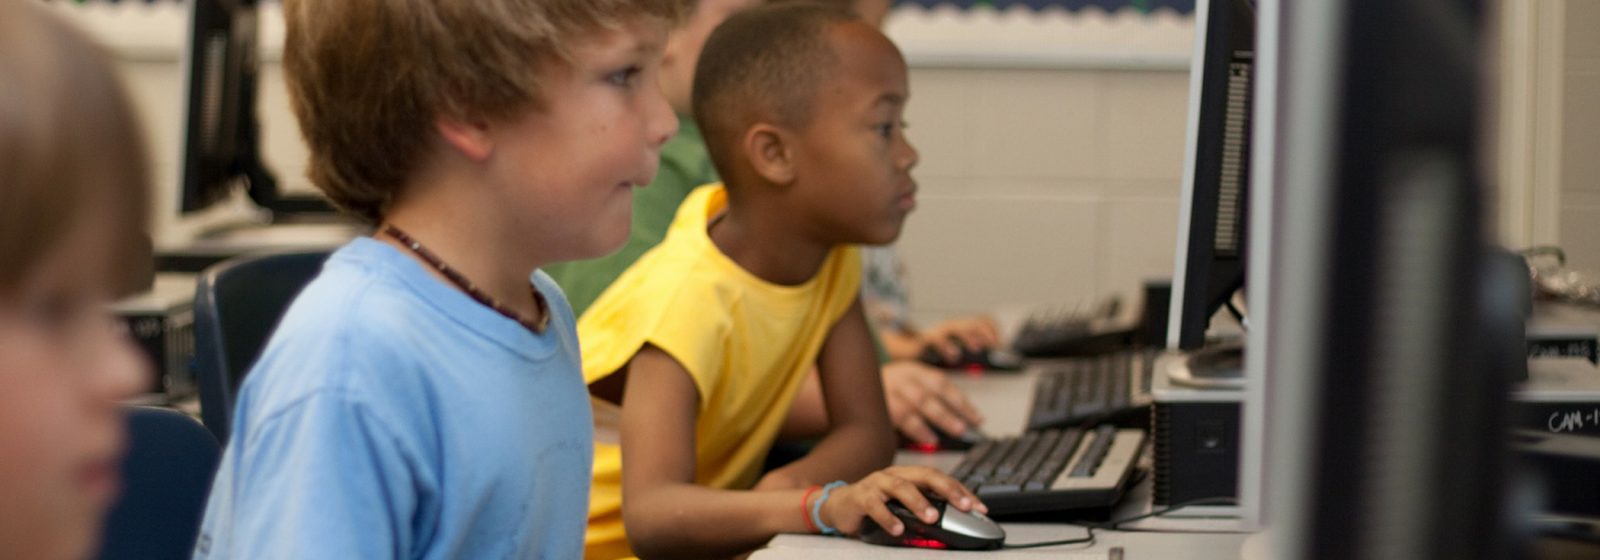 Clark Compuer Services Community Involvement Page - Kids learning computer skills at the Lucas Center